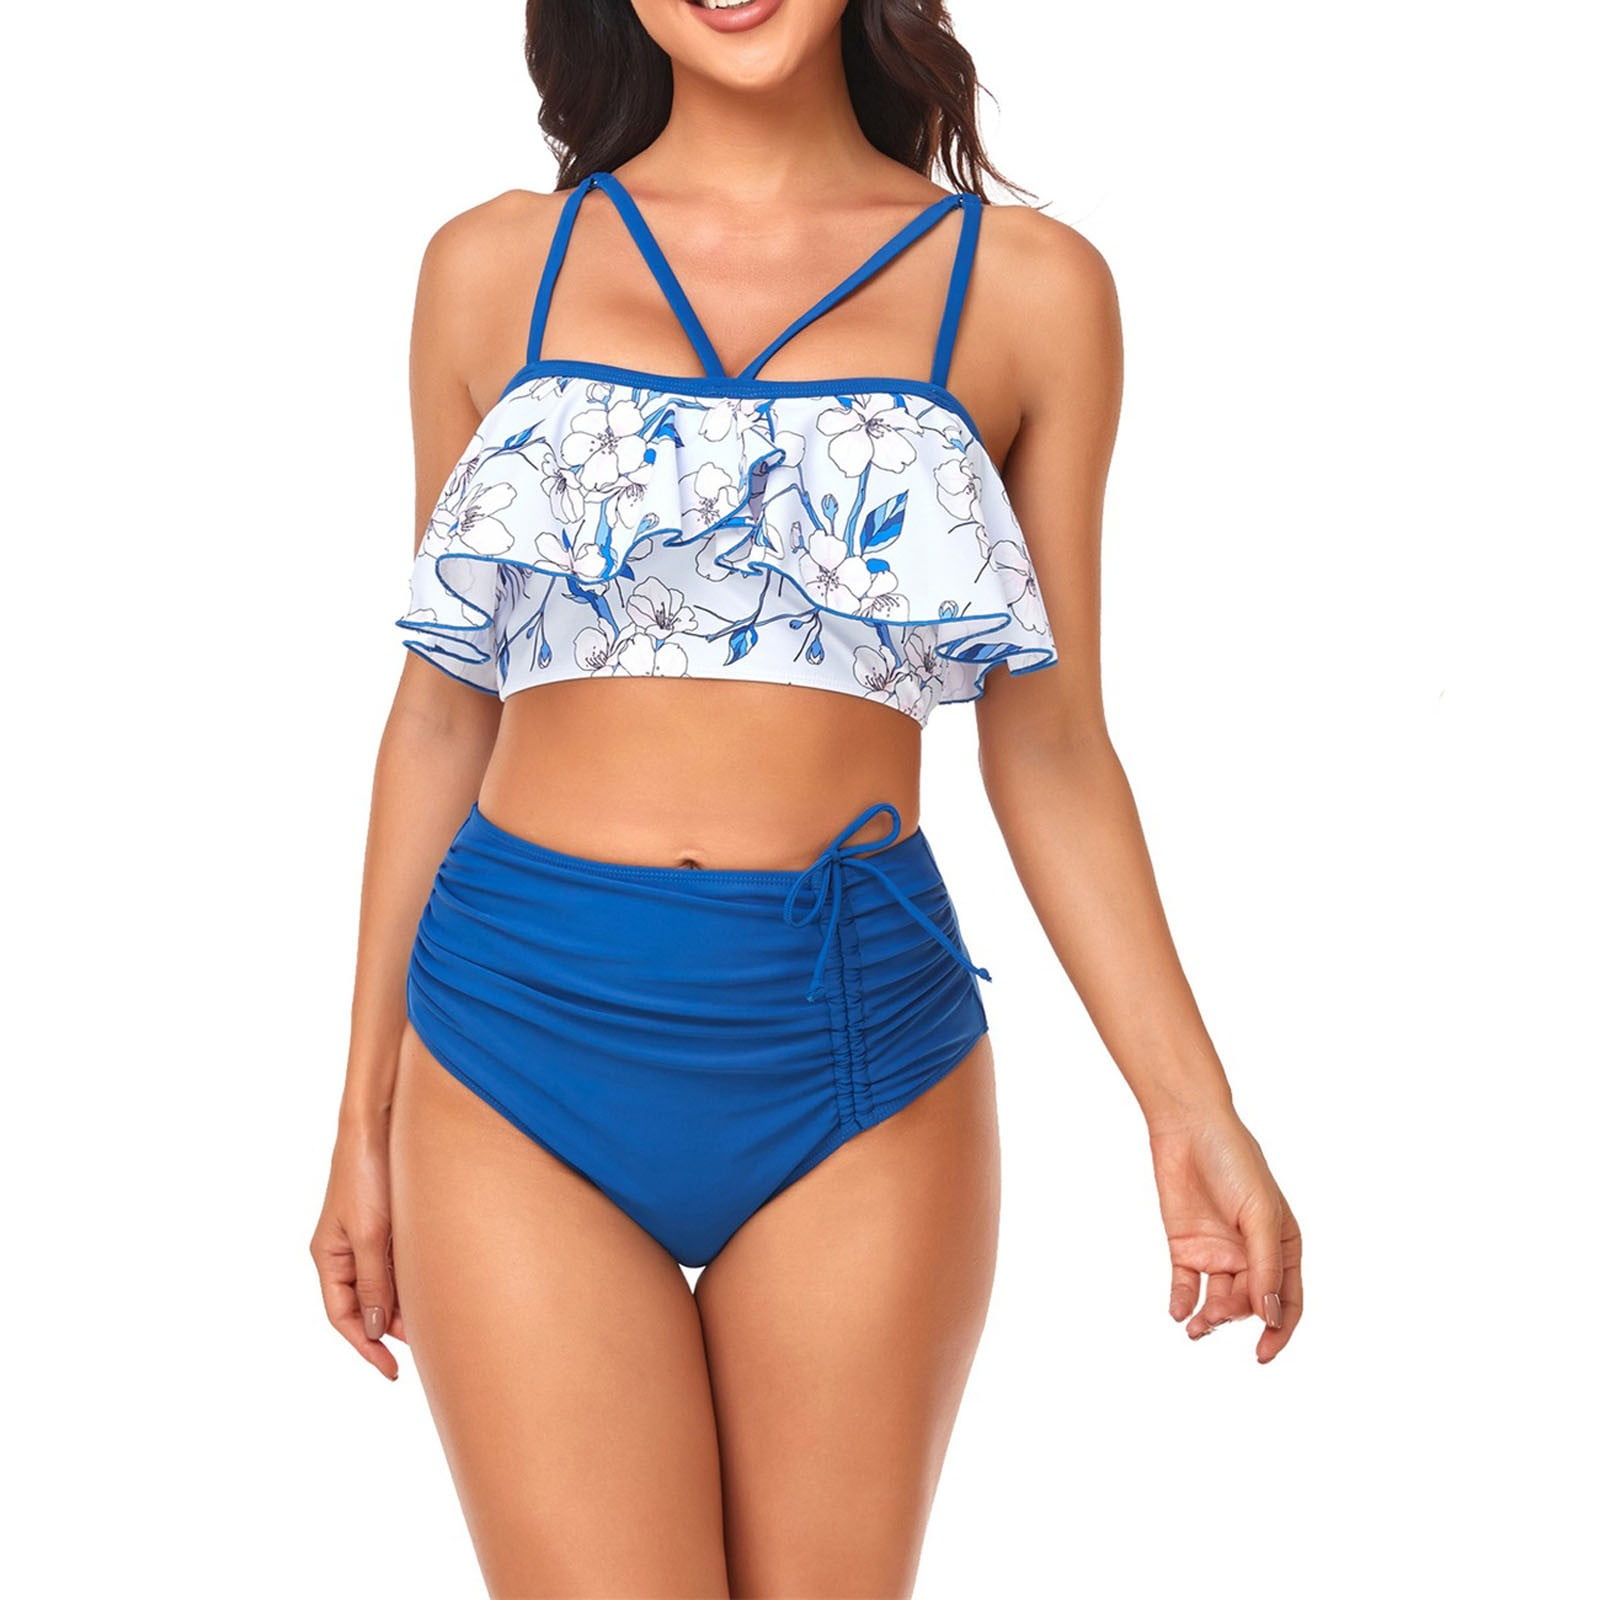 fvwitlyh Swimsuits Set for Family of 3 High Waisted Drawstring Bikini Frill  A Family That Prays Together Stays Together Swimsuits s 